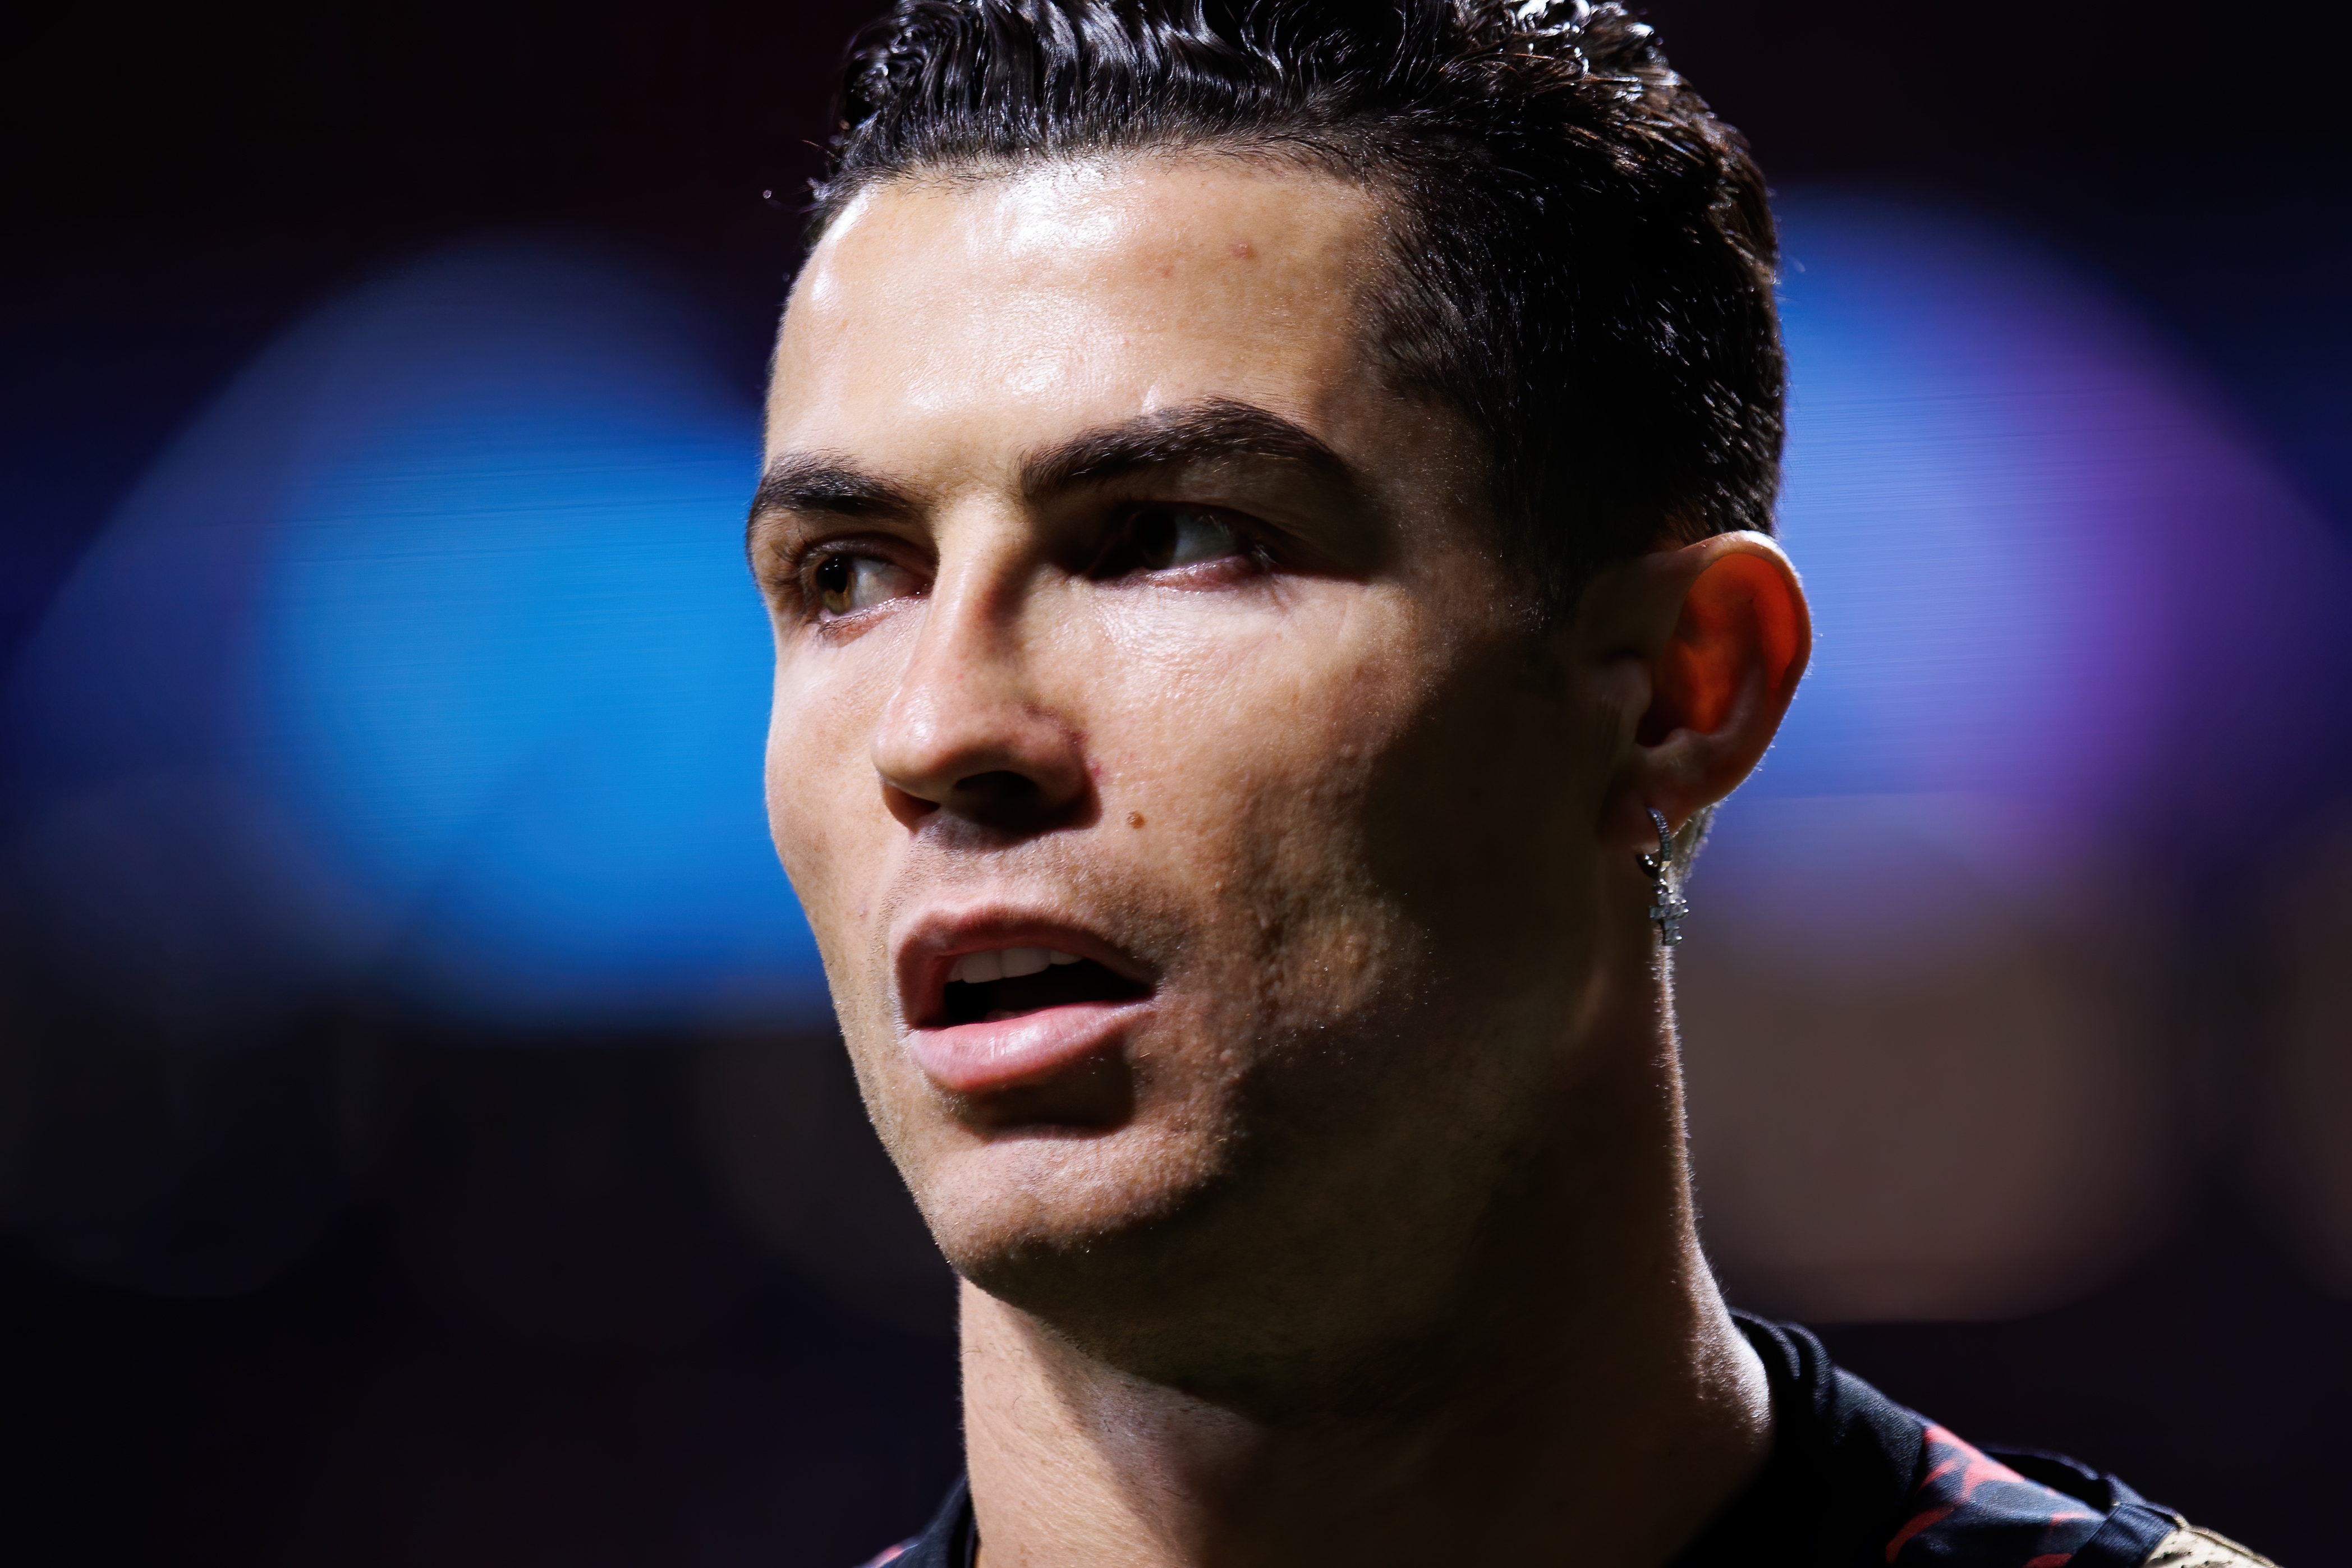 Cristiano Ronaldo launches his first NFTs and goes mega viral: why and why is it not worth investing in these digital assets